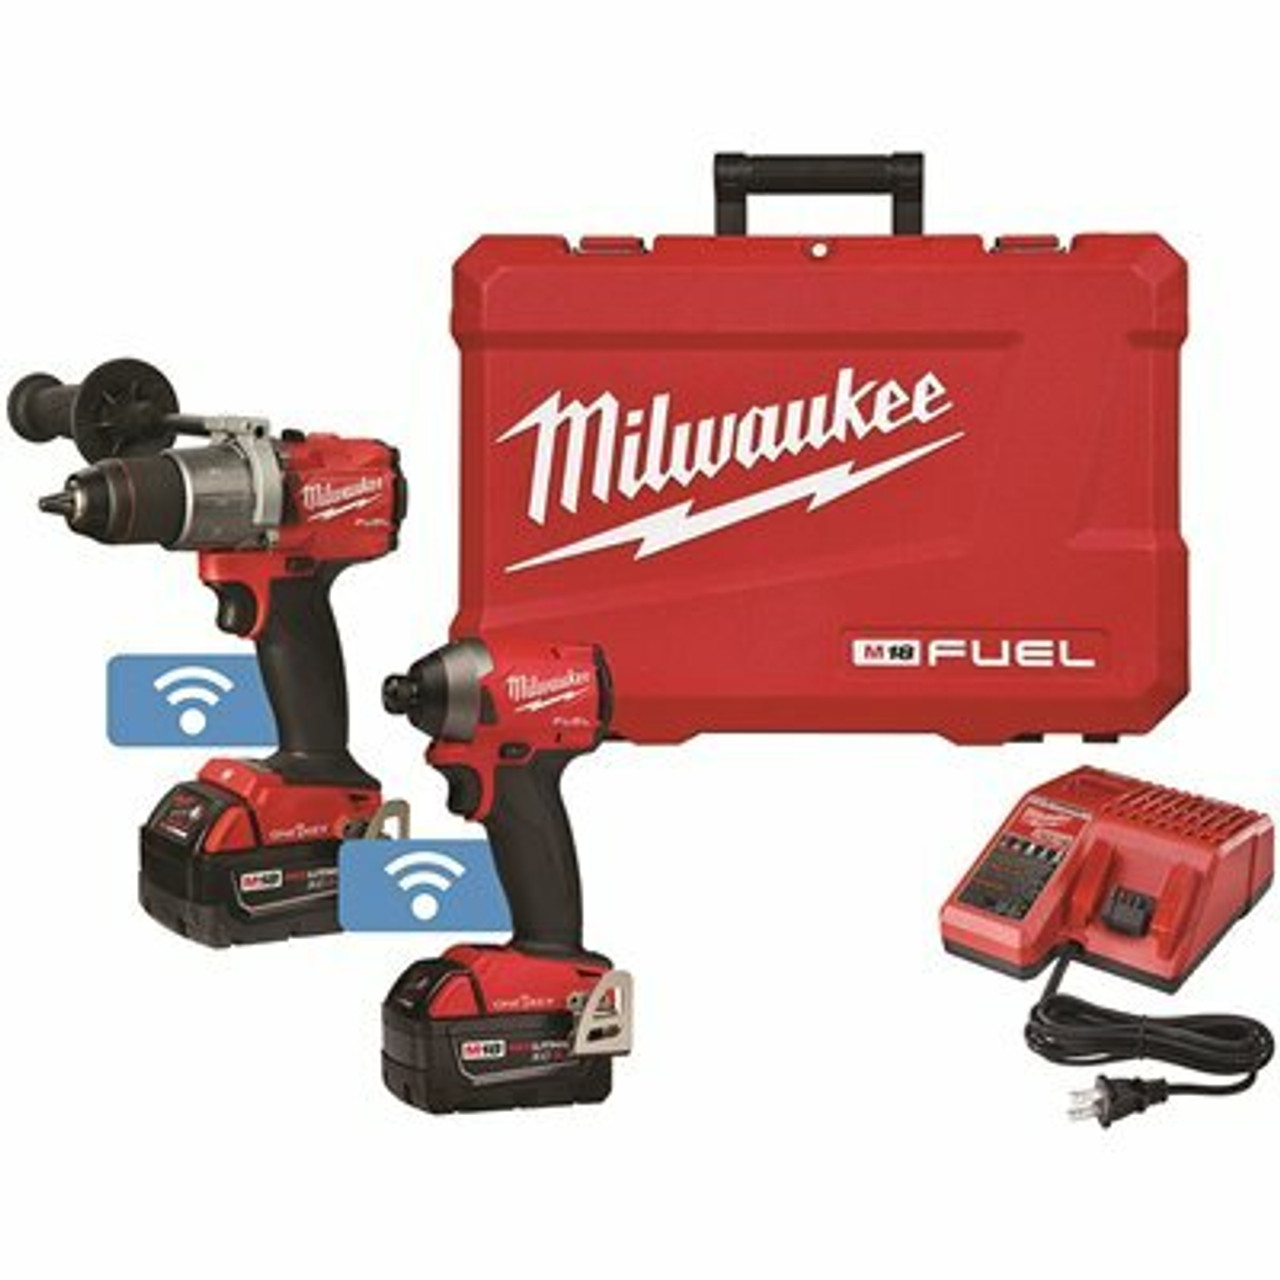 M18 Fuel One-Key 18-Volt Lithium-Ion Brushless Cordless Hammer Drill/Impact Driver Combo Kit Two 5.0 Ah Batteries Case